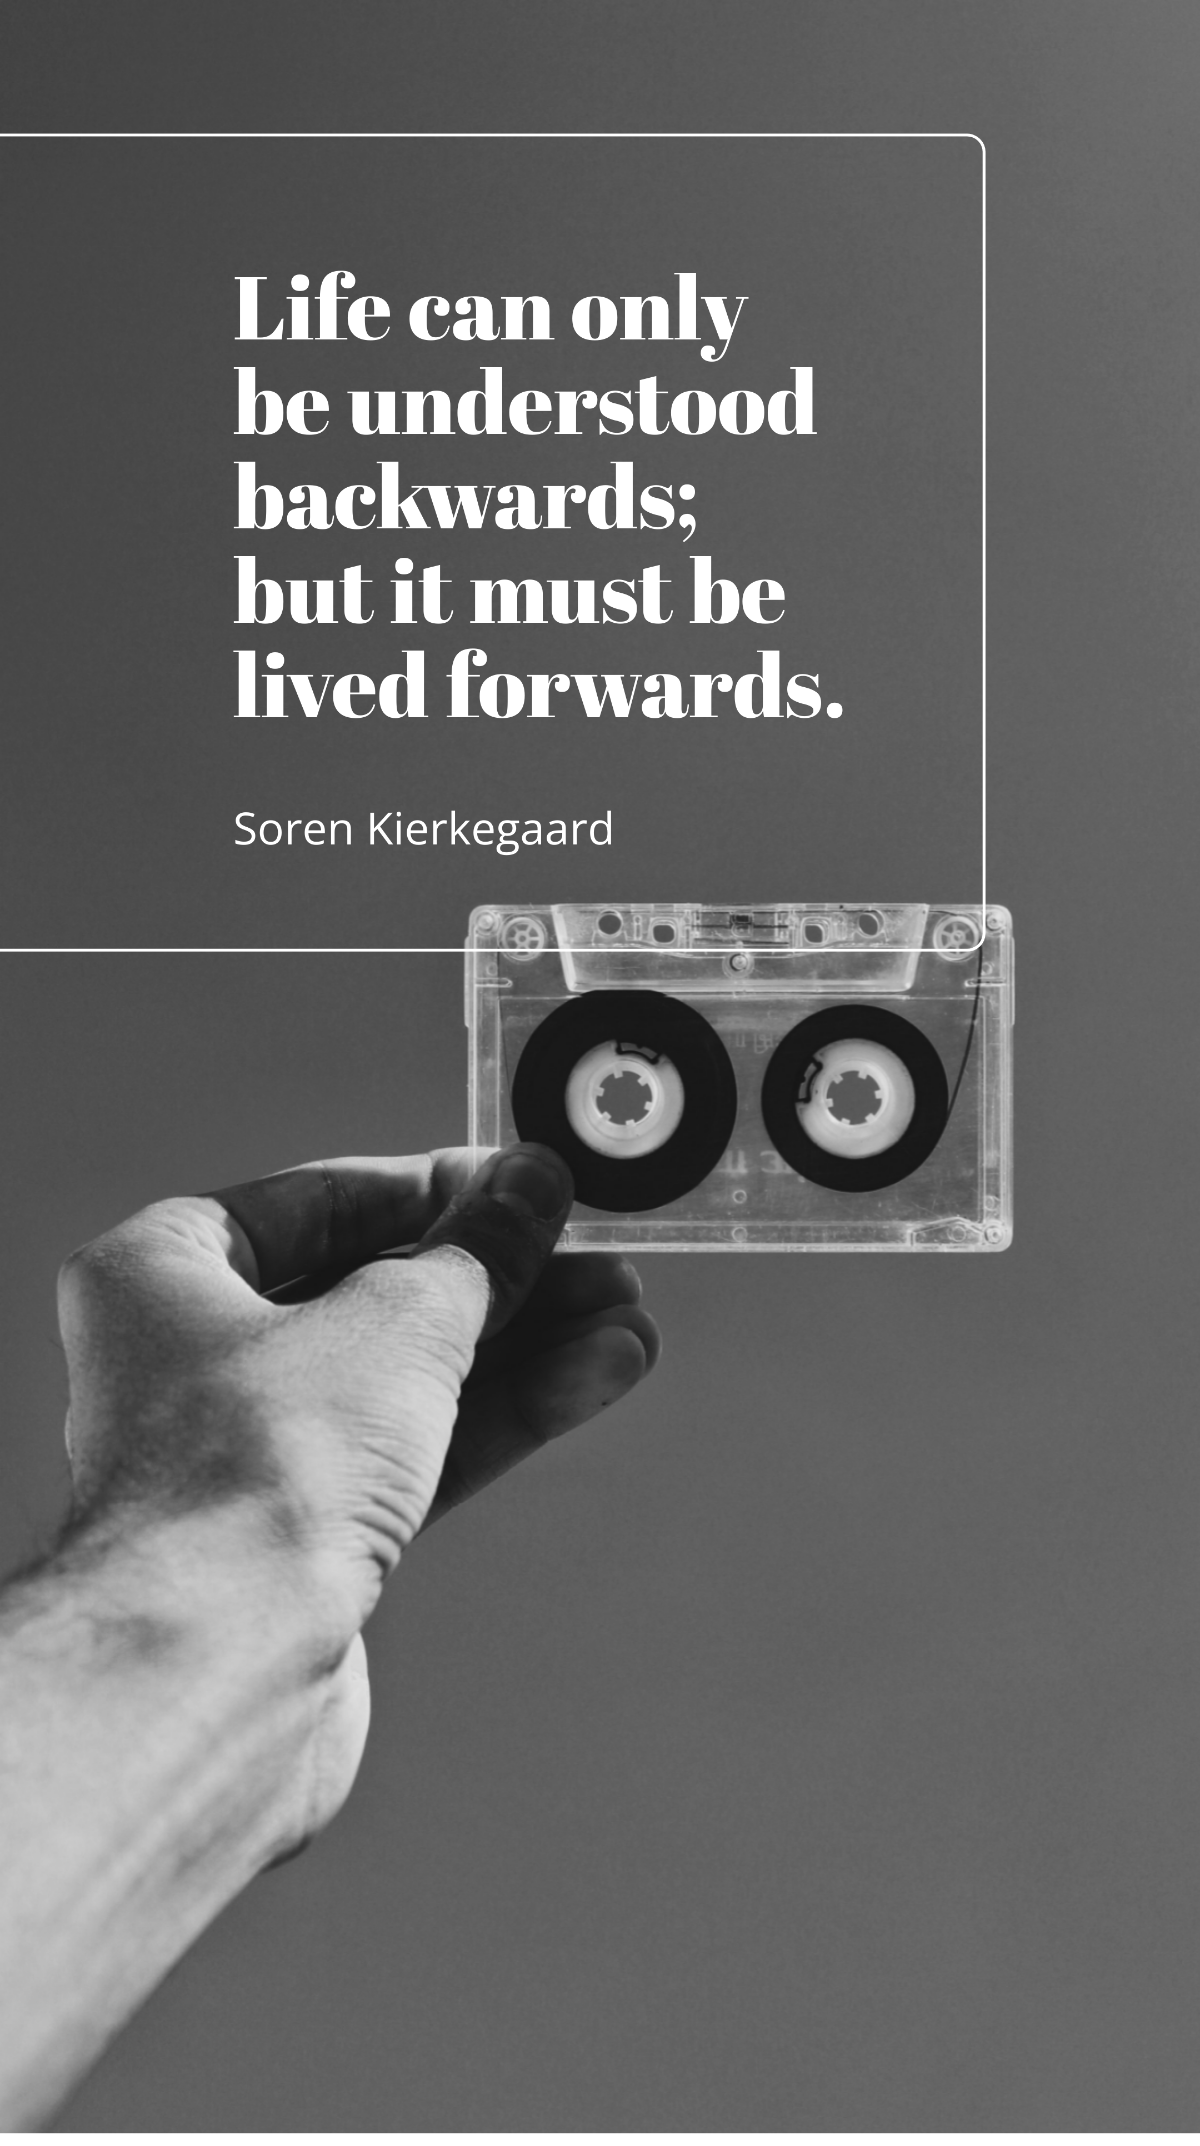 Soren Kierkegaard - Life can only be understood backwards; but it must be lived forwards. Template